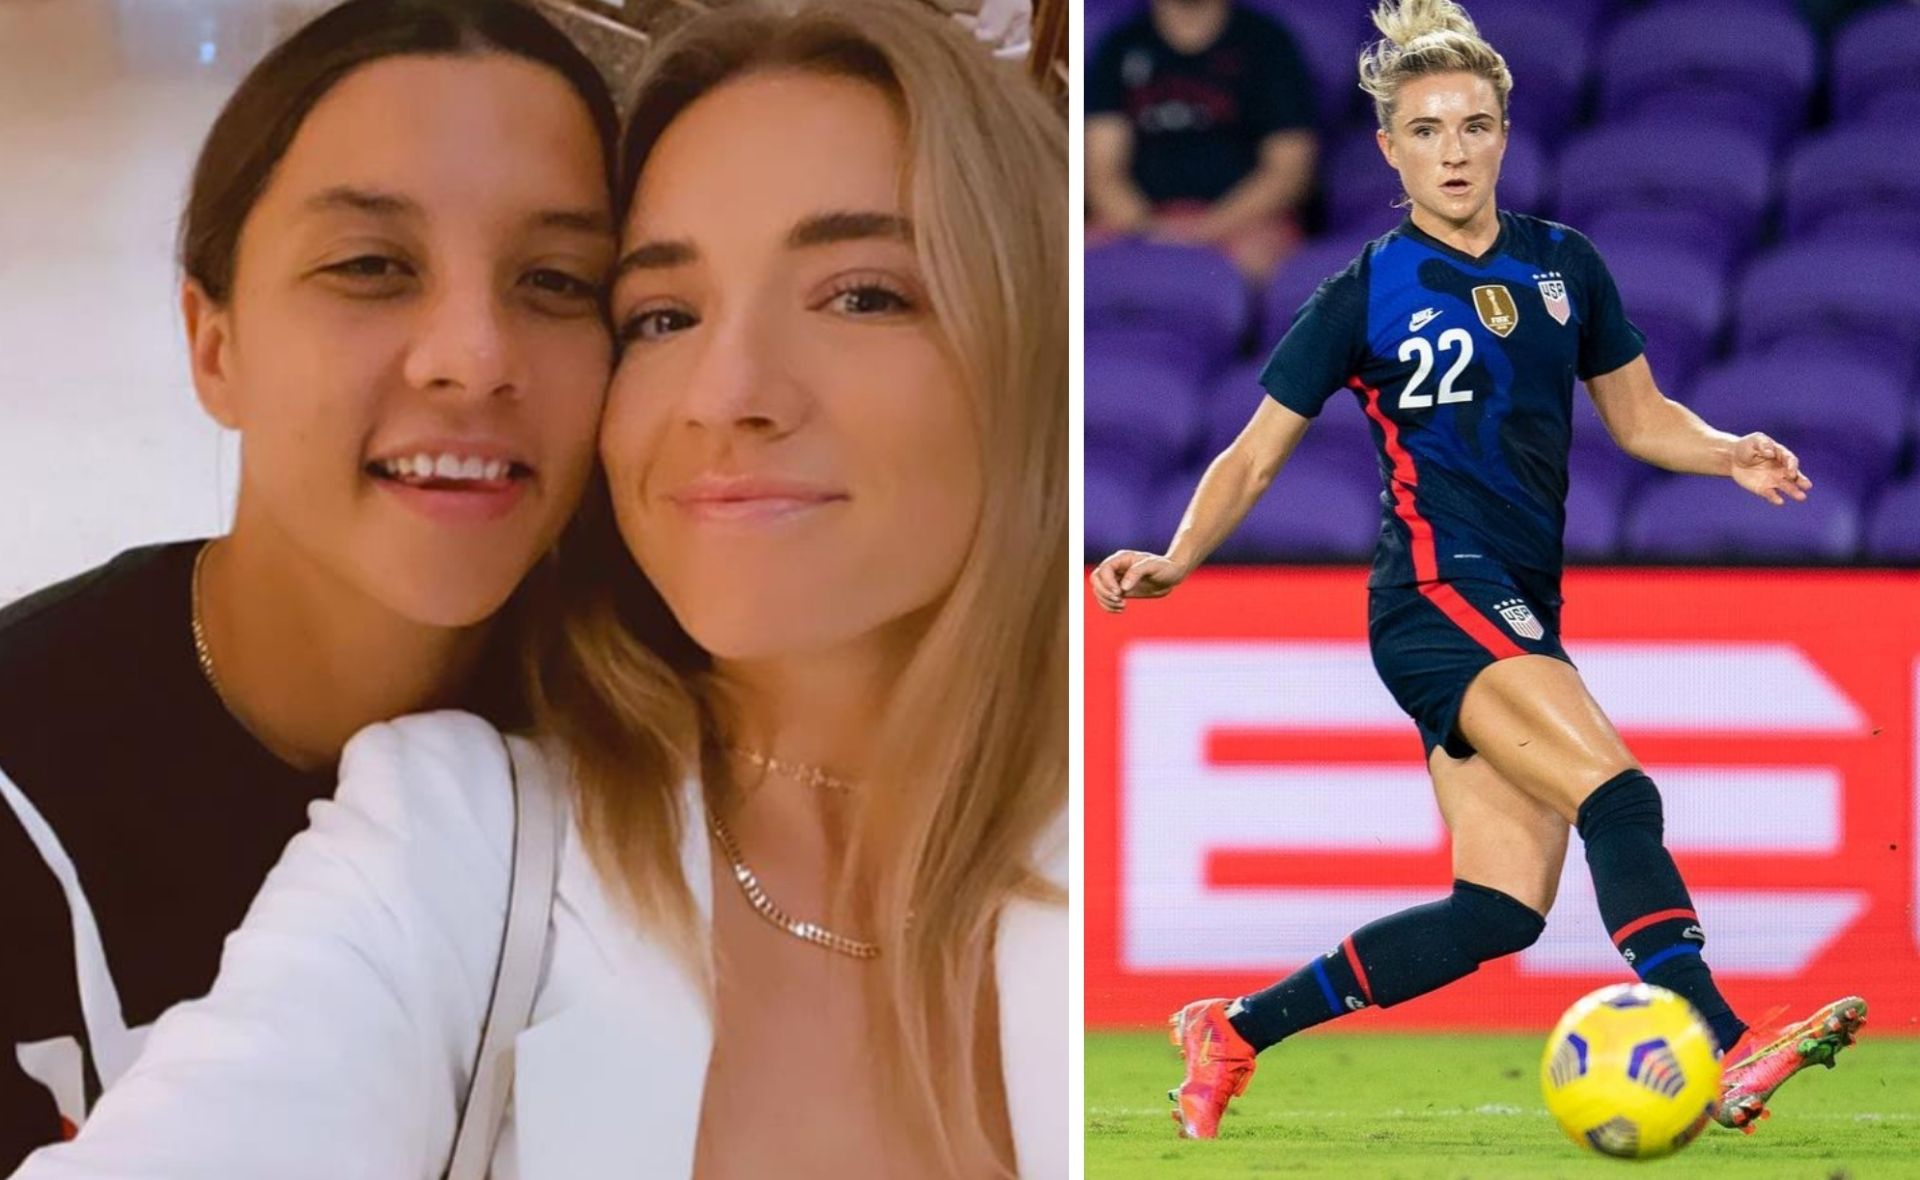 Everything you need to know about Kristie Mewis, the American soccer player who stole Matildas star Sam Kerr’s heart